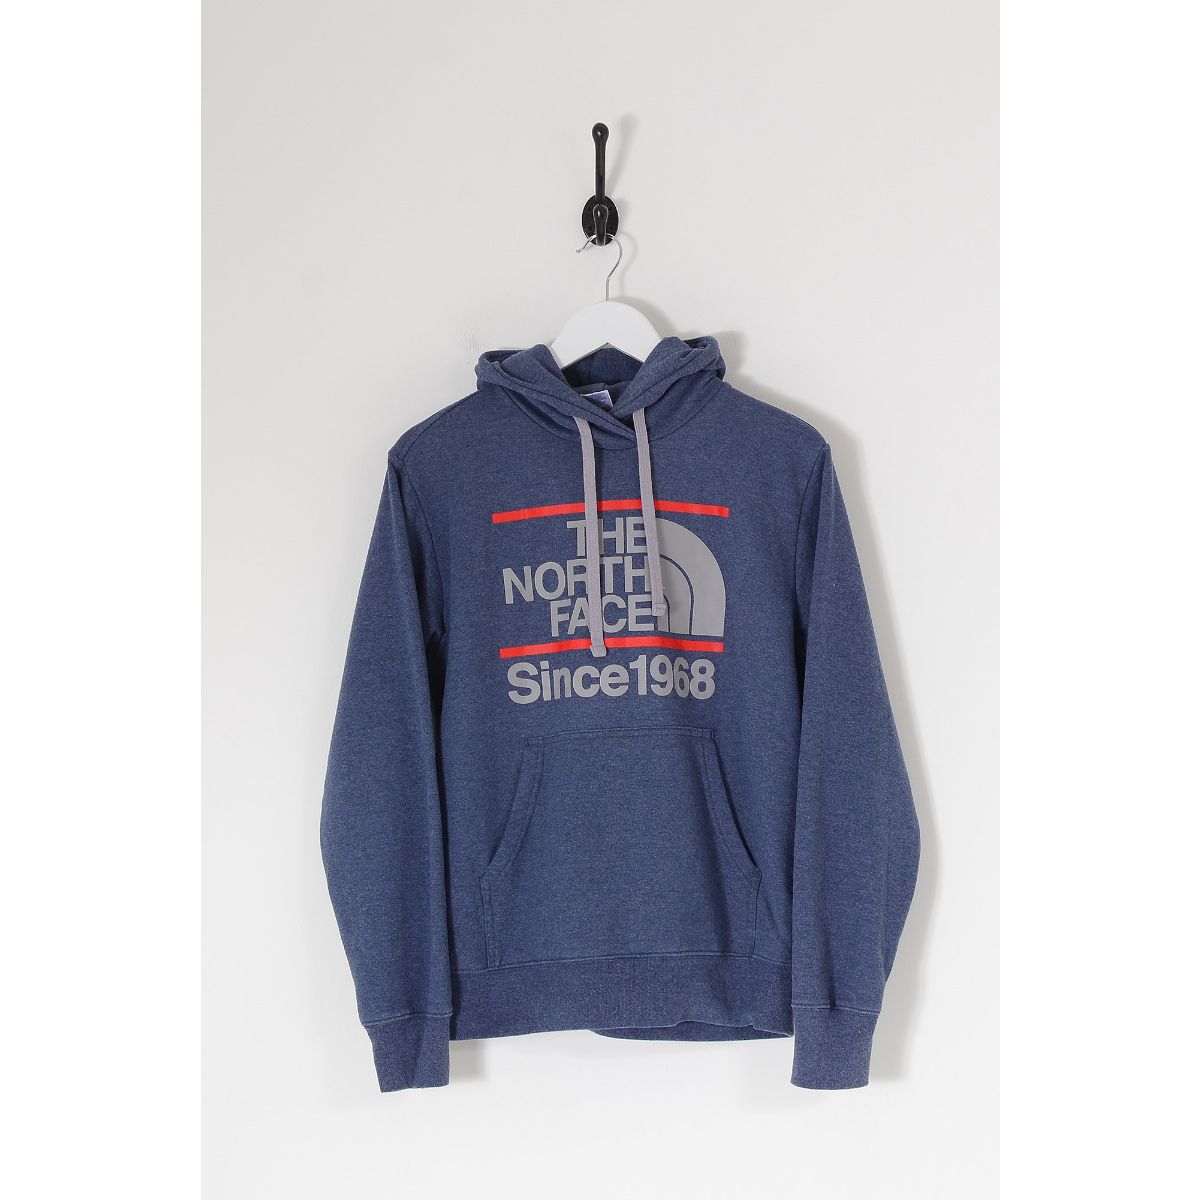 Vintage THE NORTH FACE Hoodie Dark Blue Small